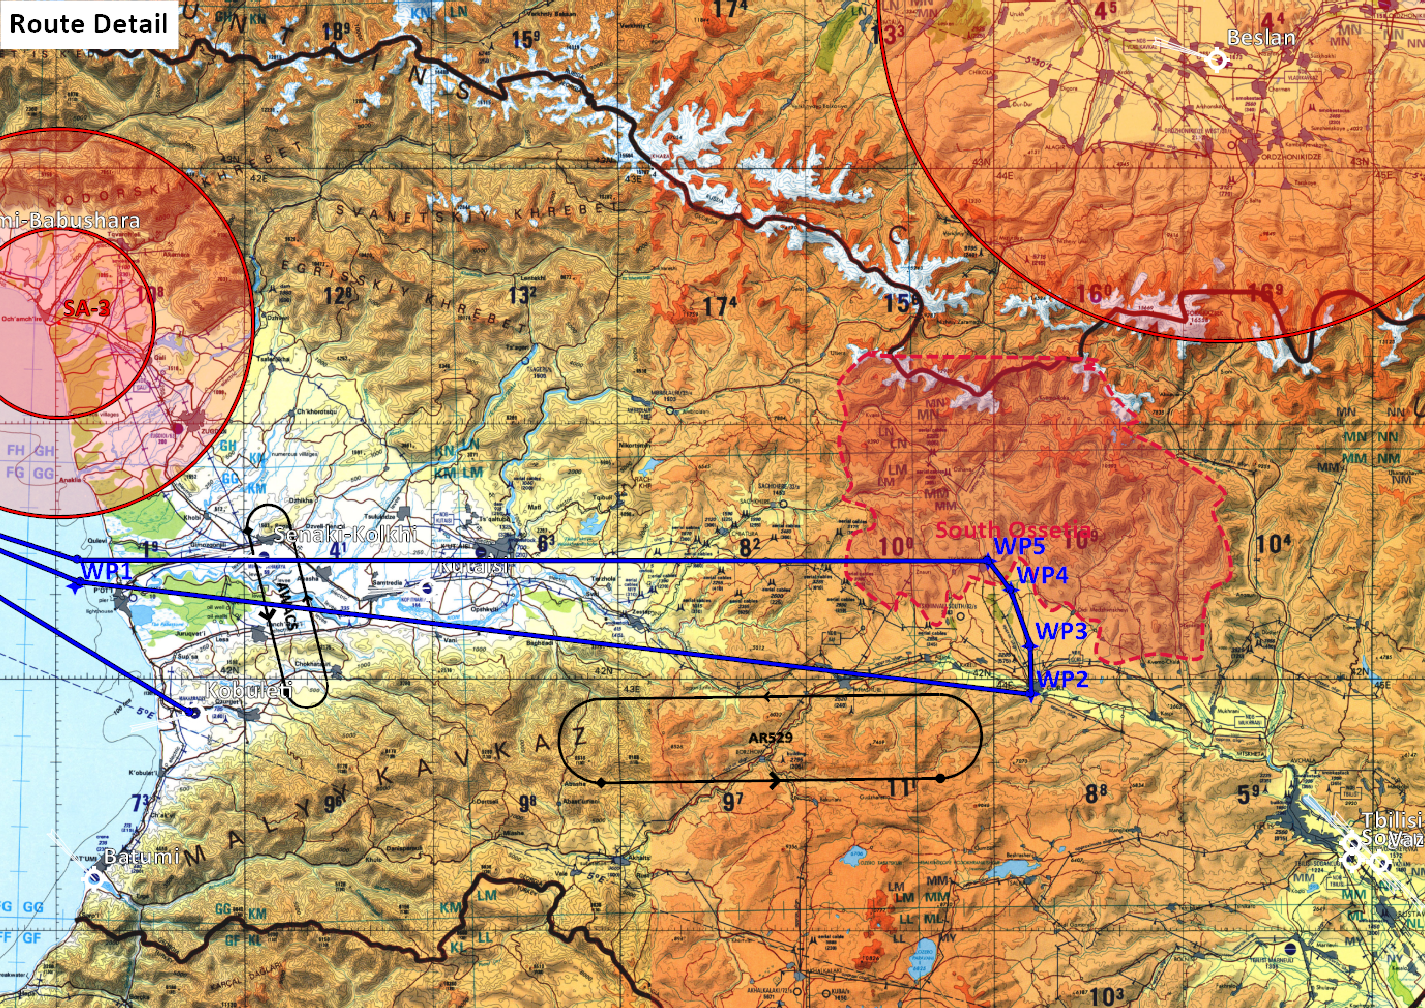 _Snapshot_20210113124609_Route Detail.png